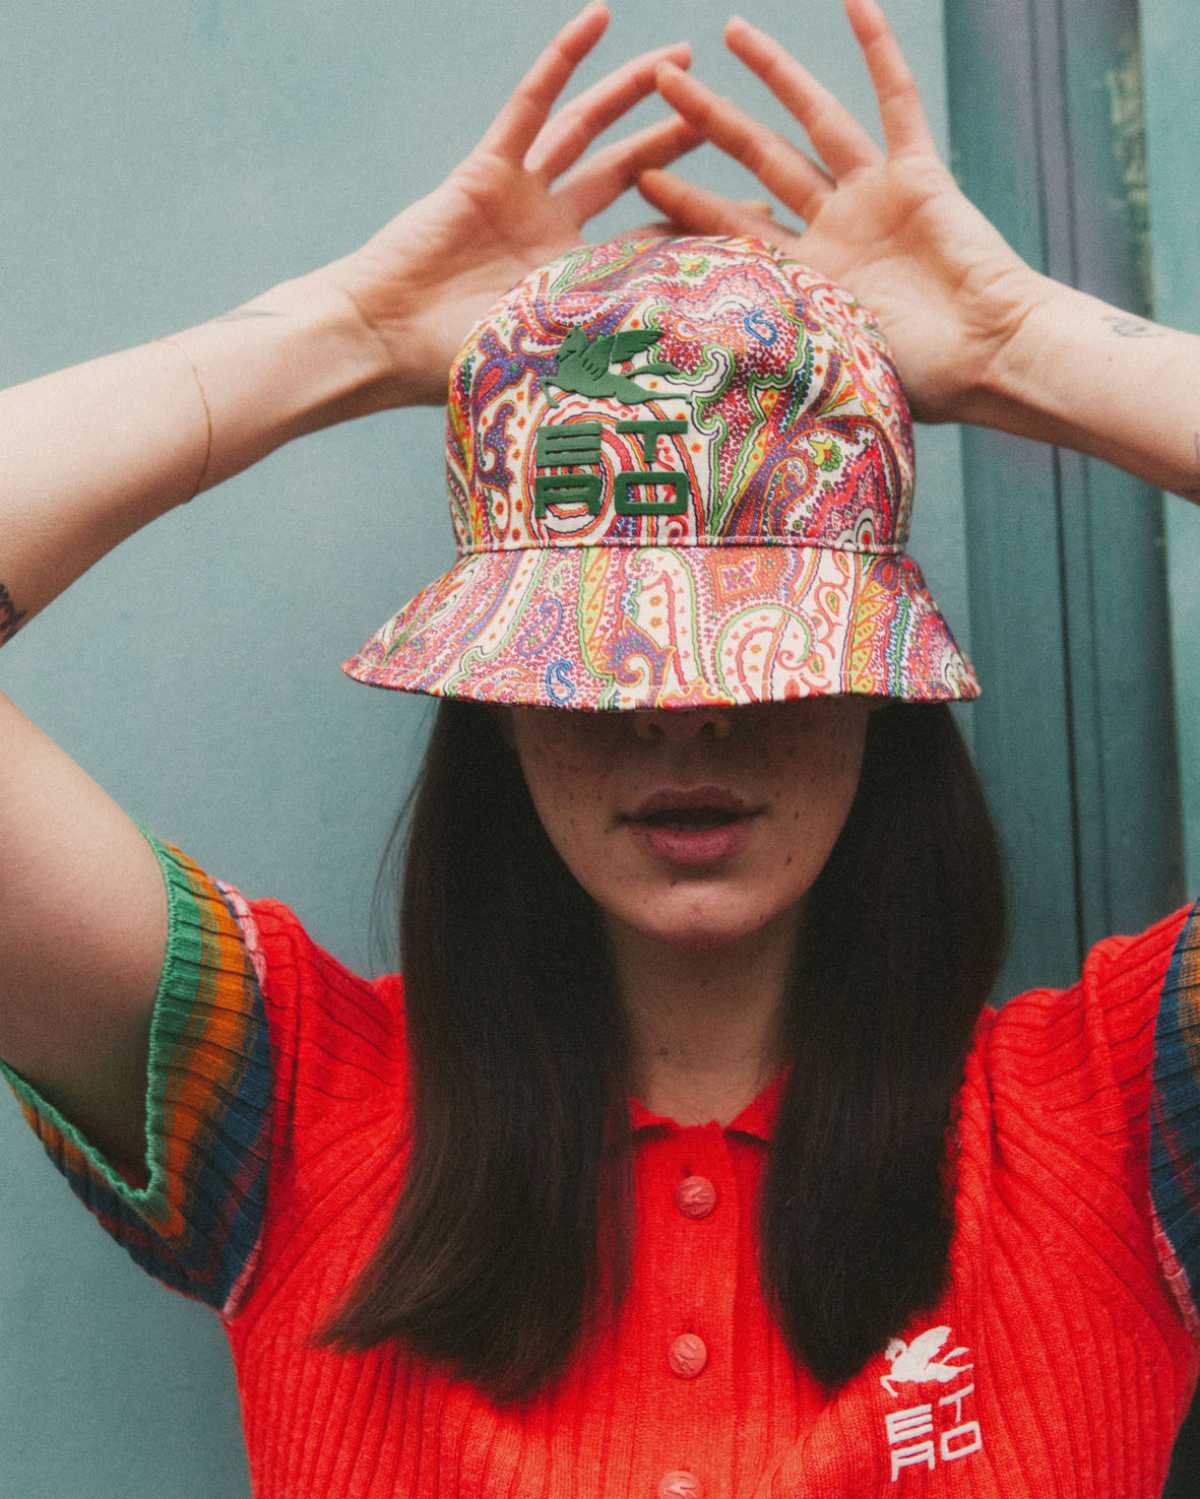 Etro Celebrates Valentine’s Day With The New “Love Hats” Capsule Collection